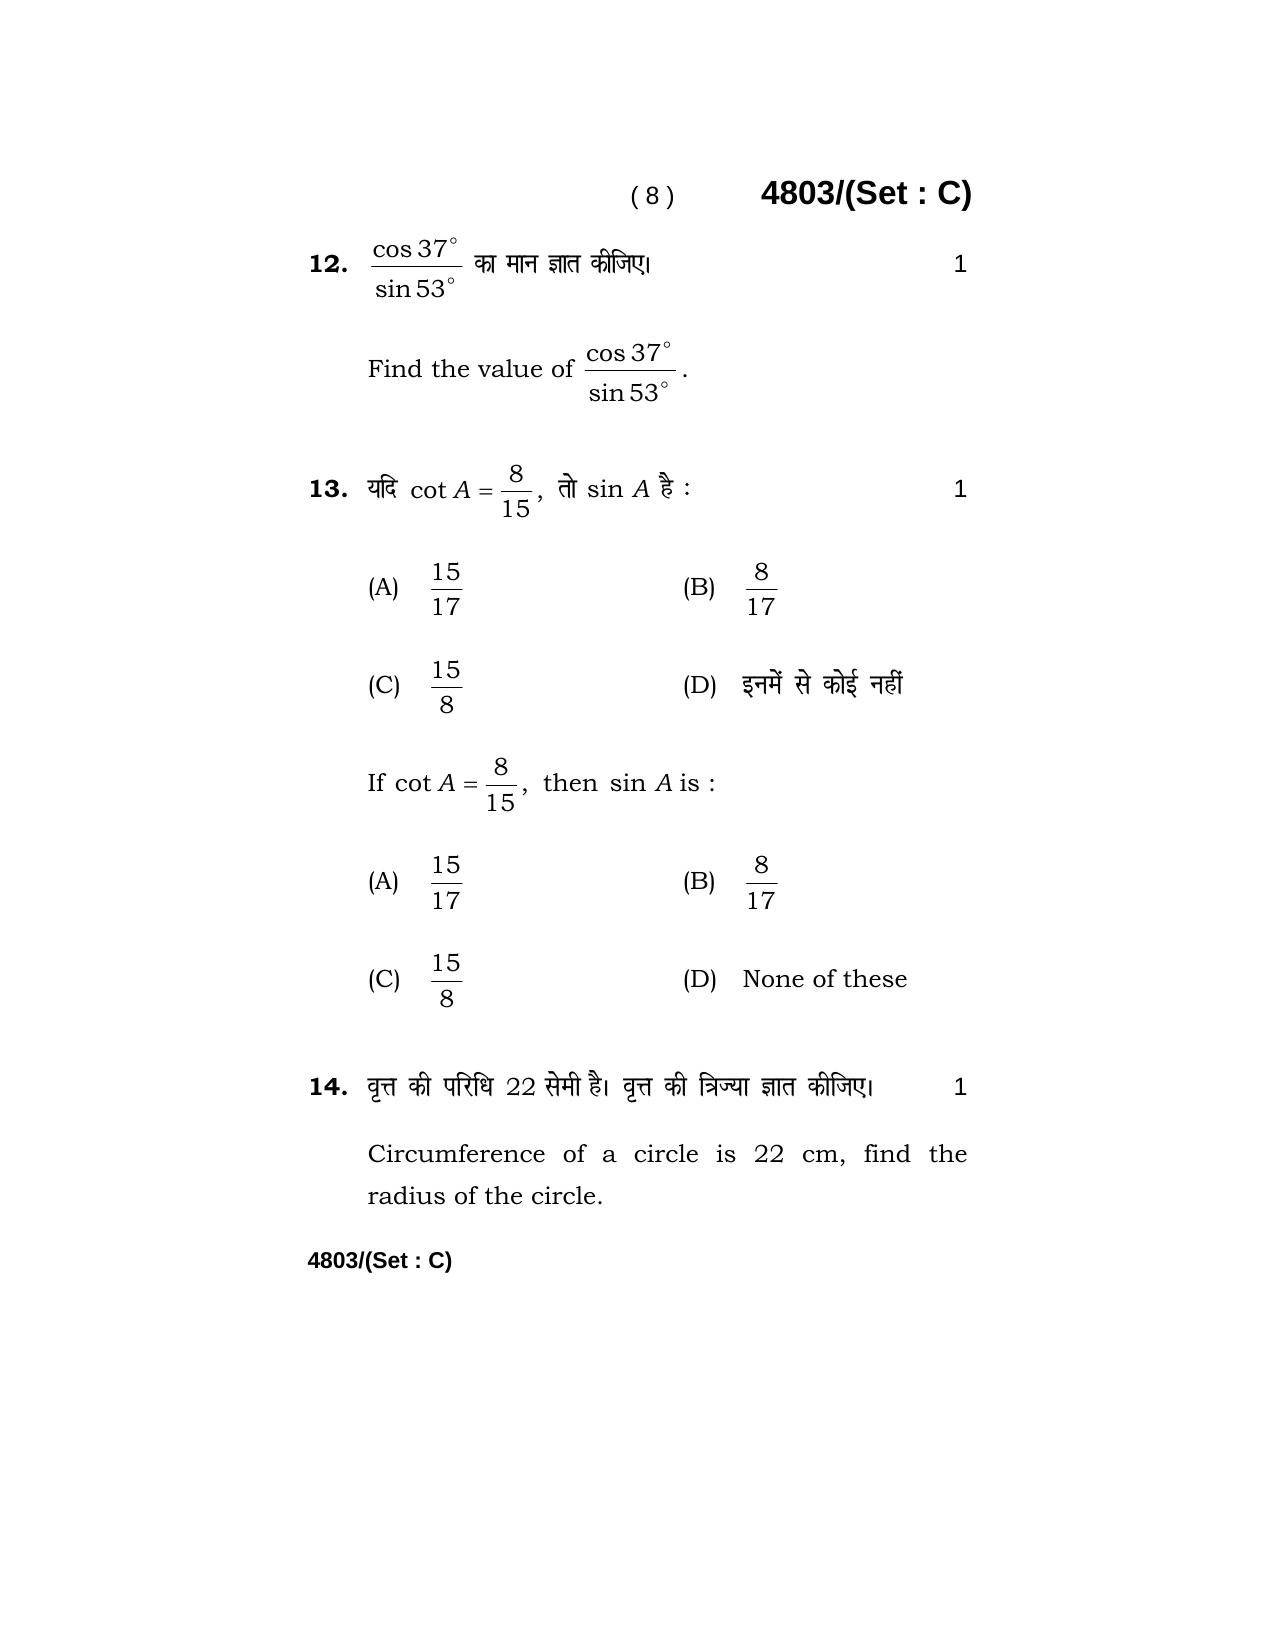 Haryana Board HBSE Class 10 Mathematics 2020 Question Paper - Page 40